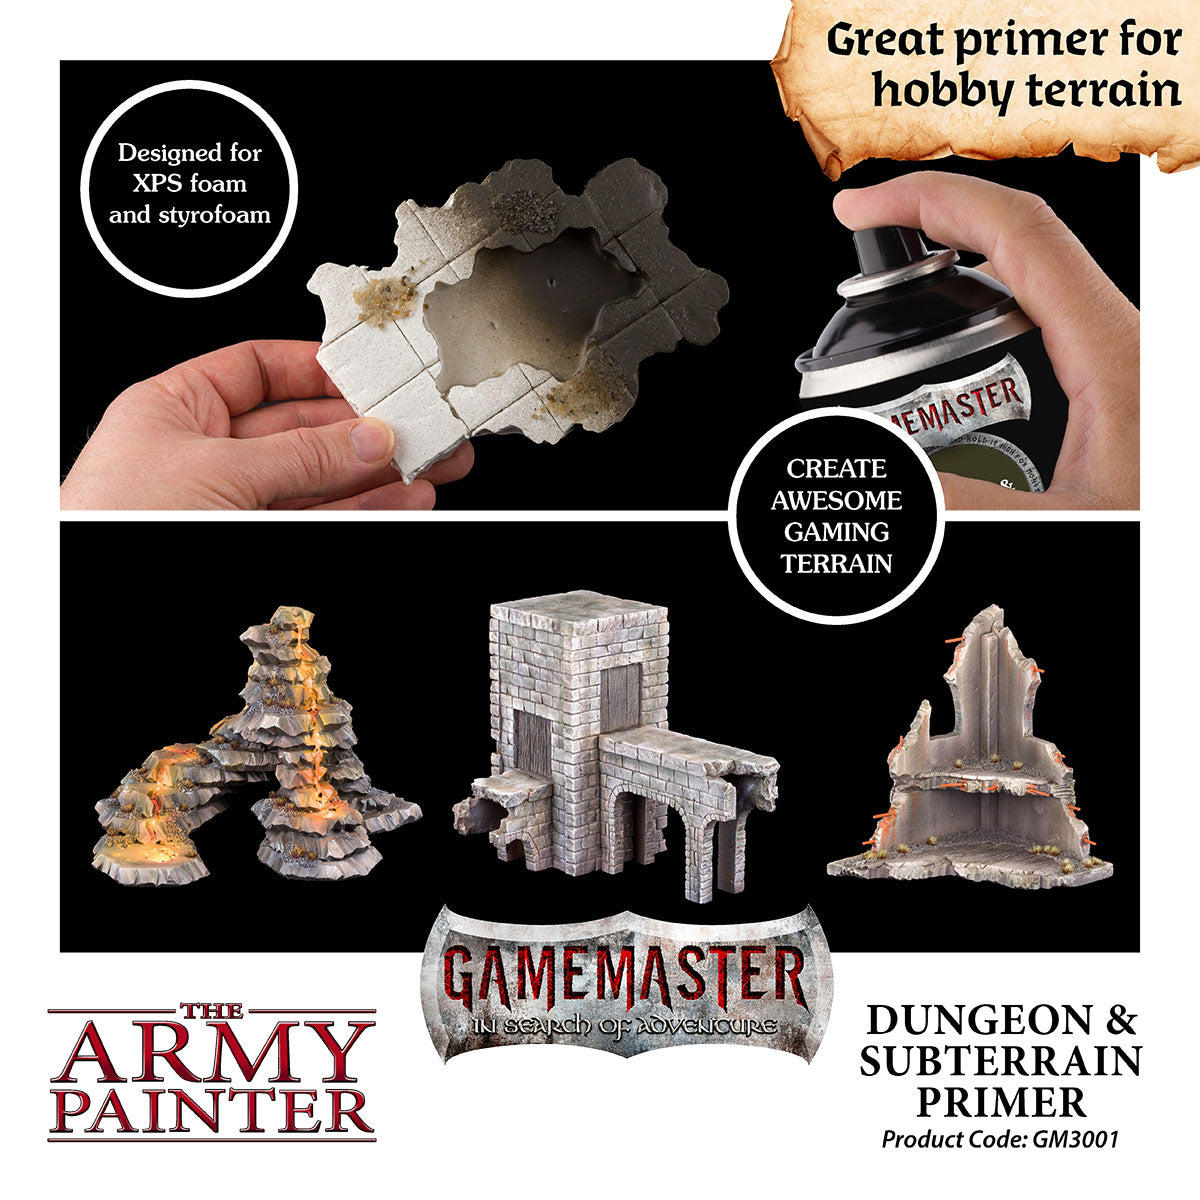  The Army Painter-Gamemaster Character Paint Set with 20  Warpaint 19x12 ml and 12 ml Brush-on Primer, 5 28mm Miniatures for  Miniature Wargaming, Acrylic Paint Set, Detail Paint Brush & Guide Book 